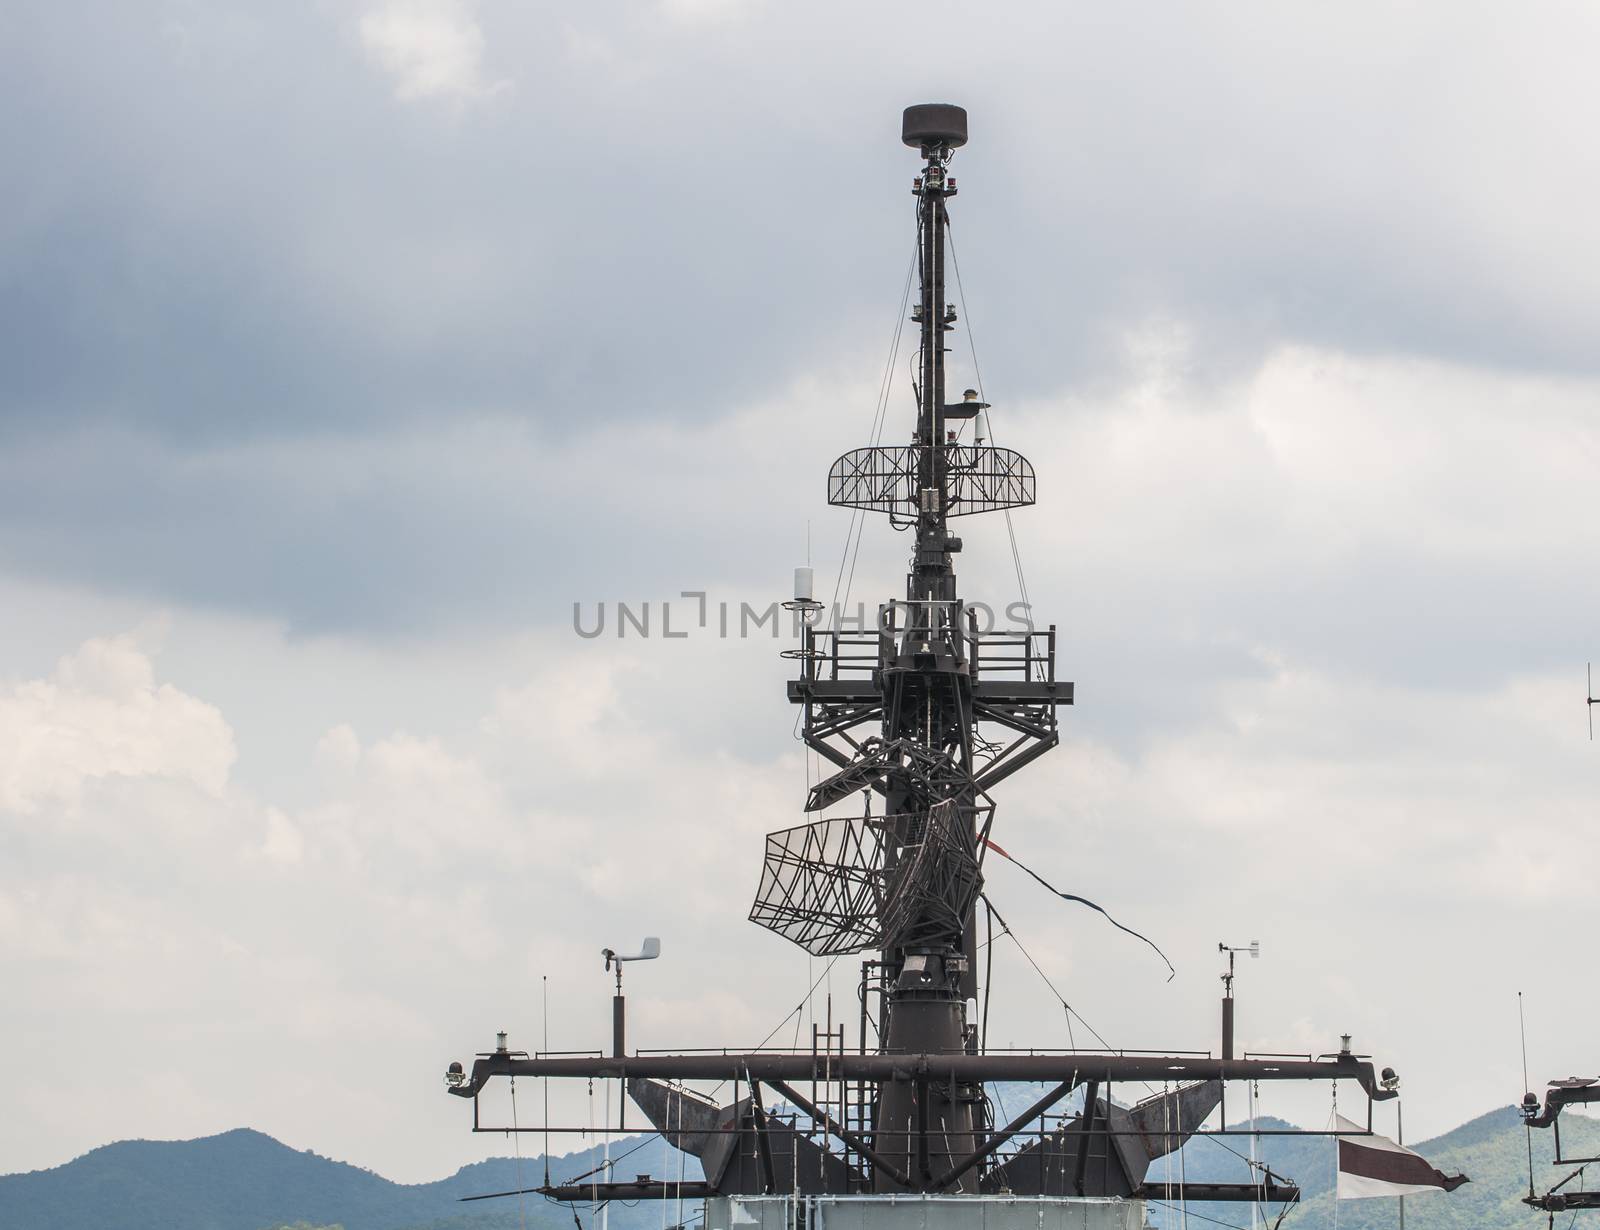 Detail of antenna on warship the Thailand navy ship